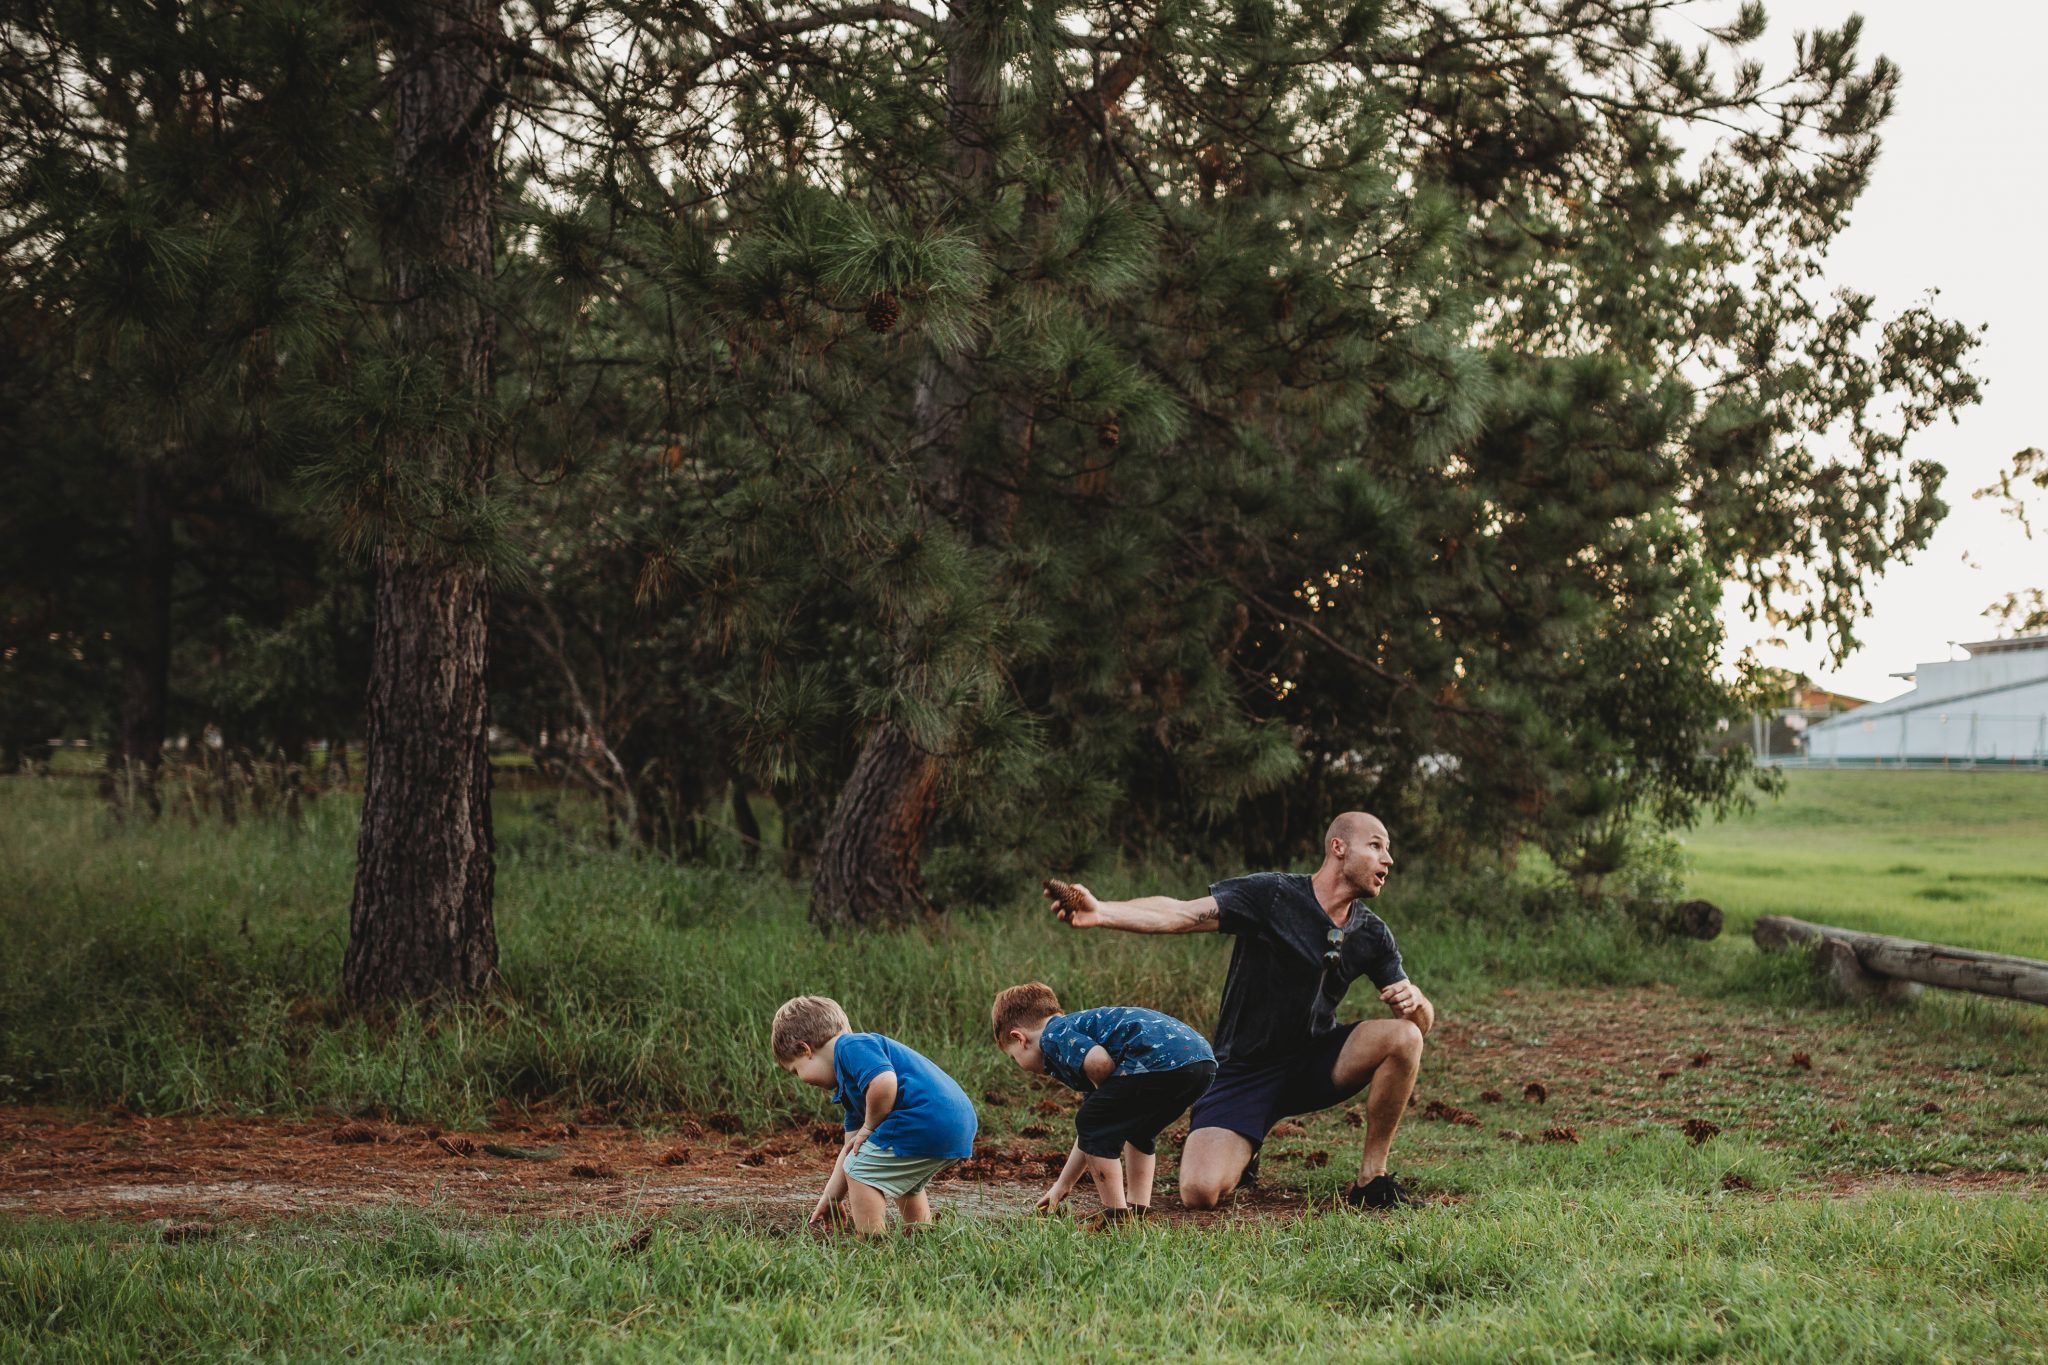 Boys playing with their father, throwing pinecones as pretend grenades